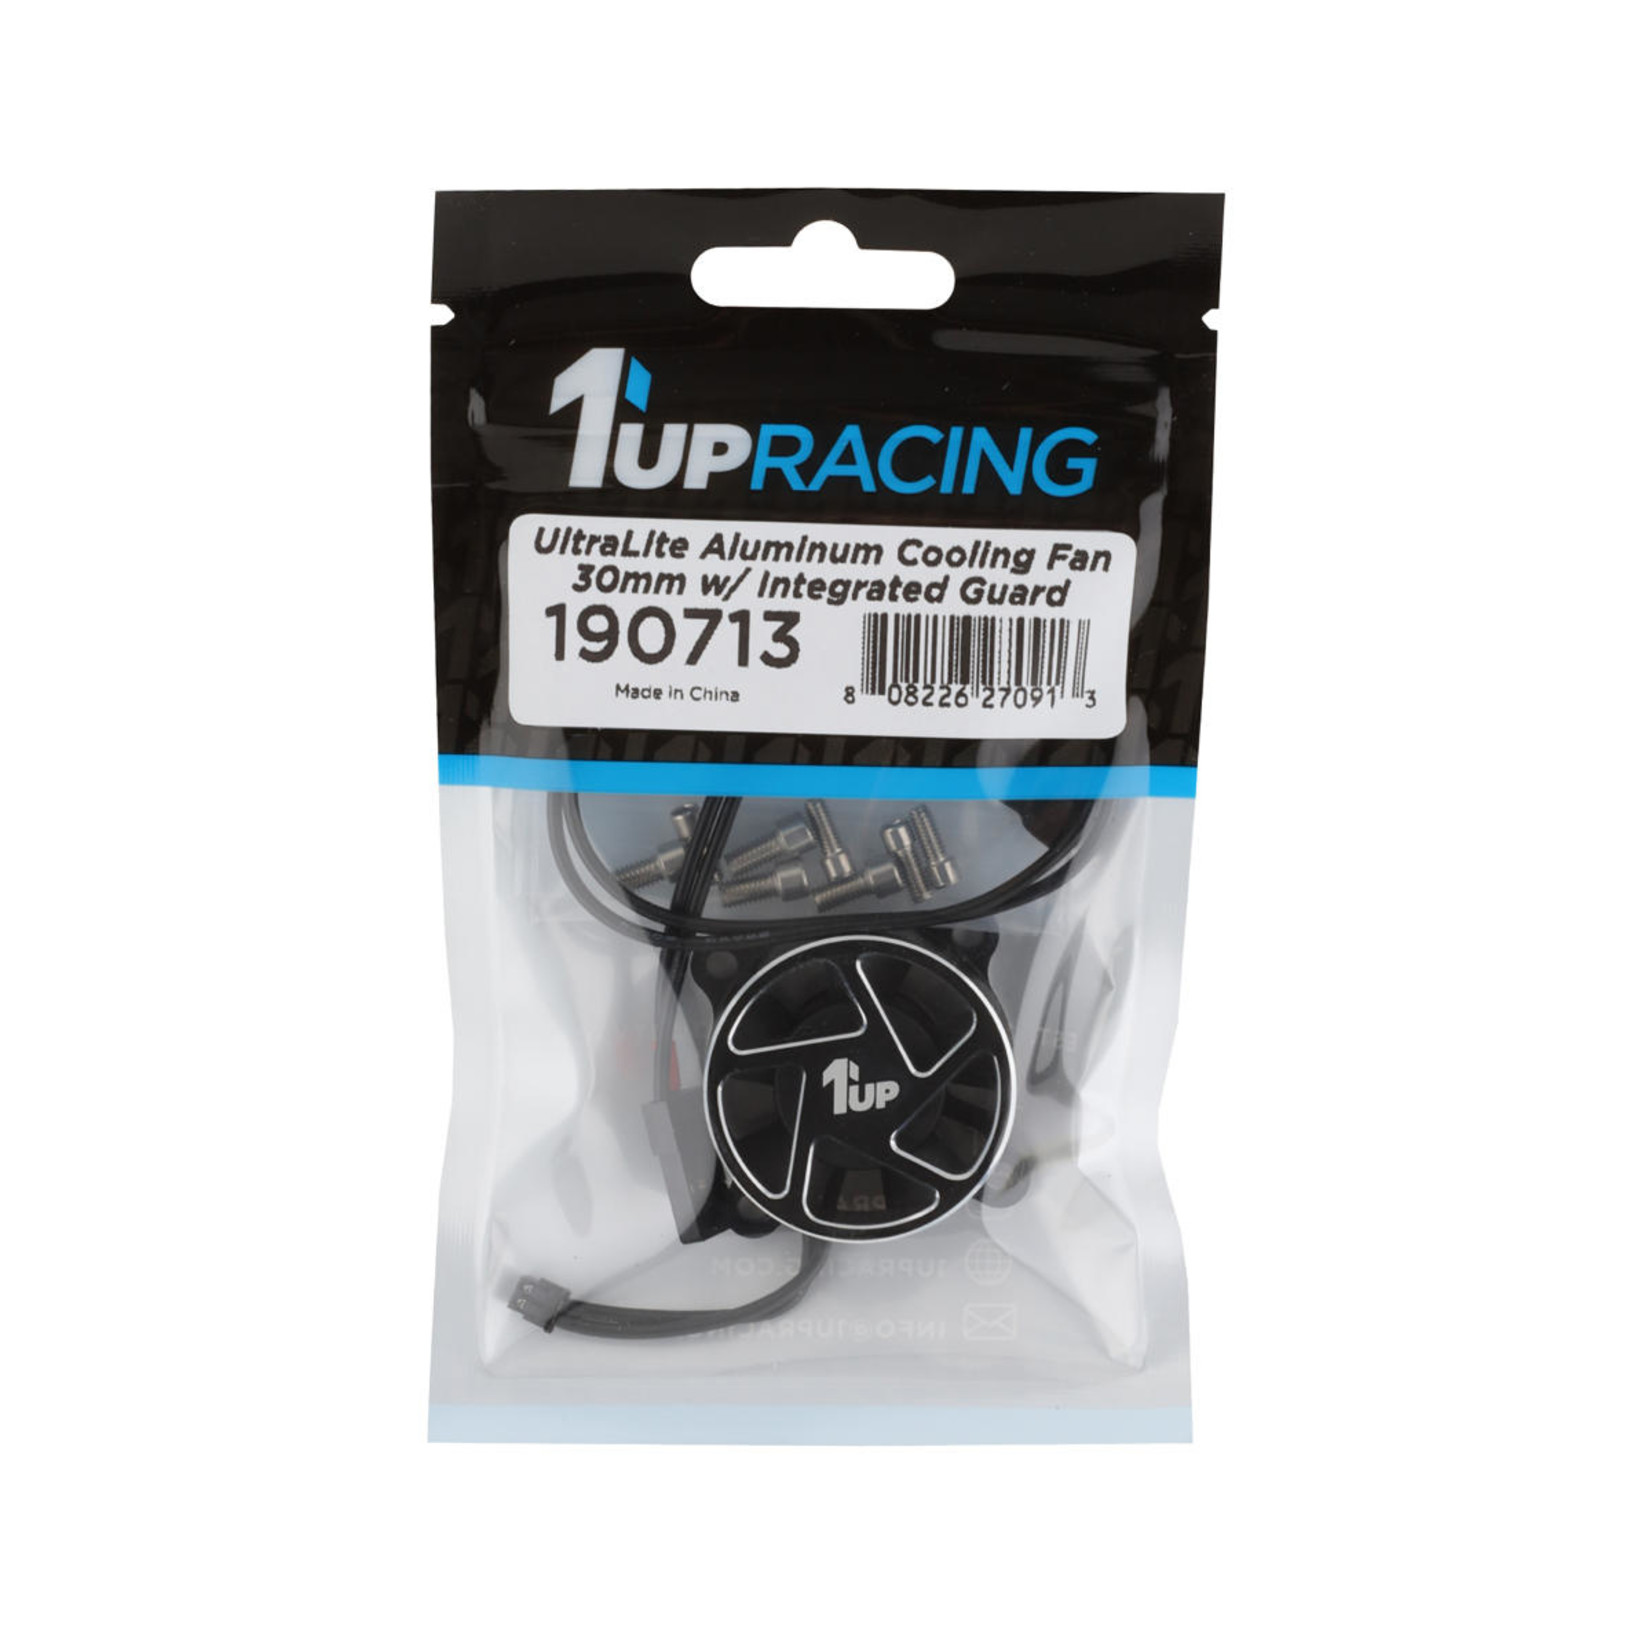 1UP Racing 1UP Racing UltraLite Aluminum 30mm High-Speed Cooling Fan (Black) #190713